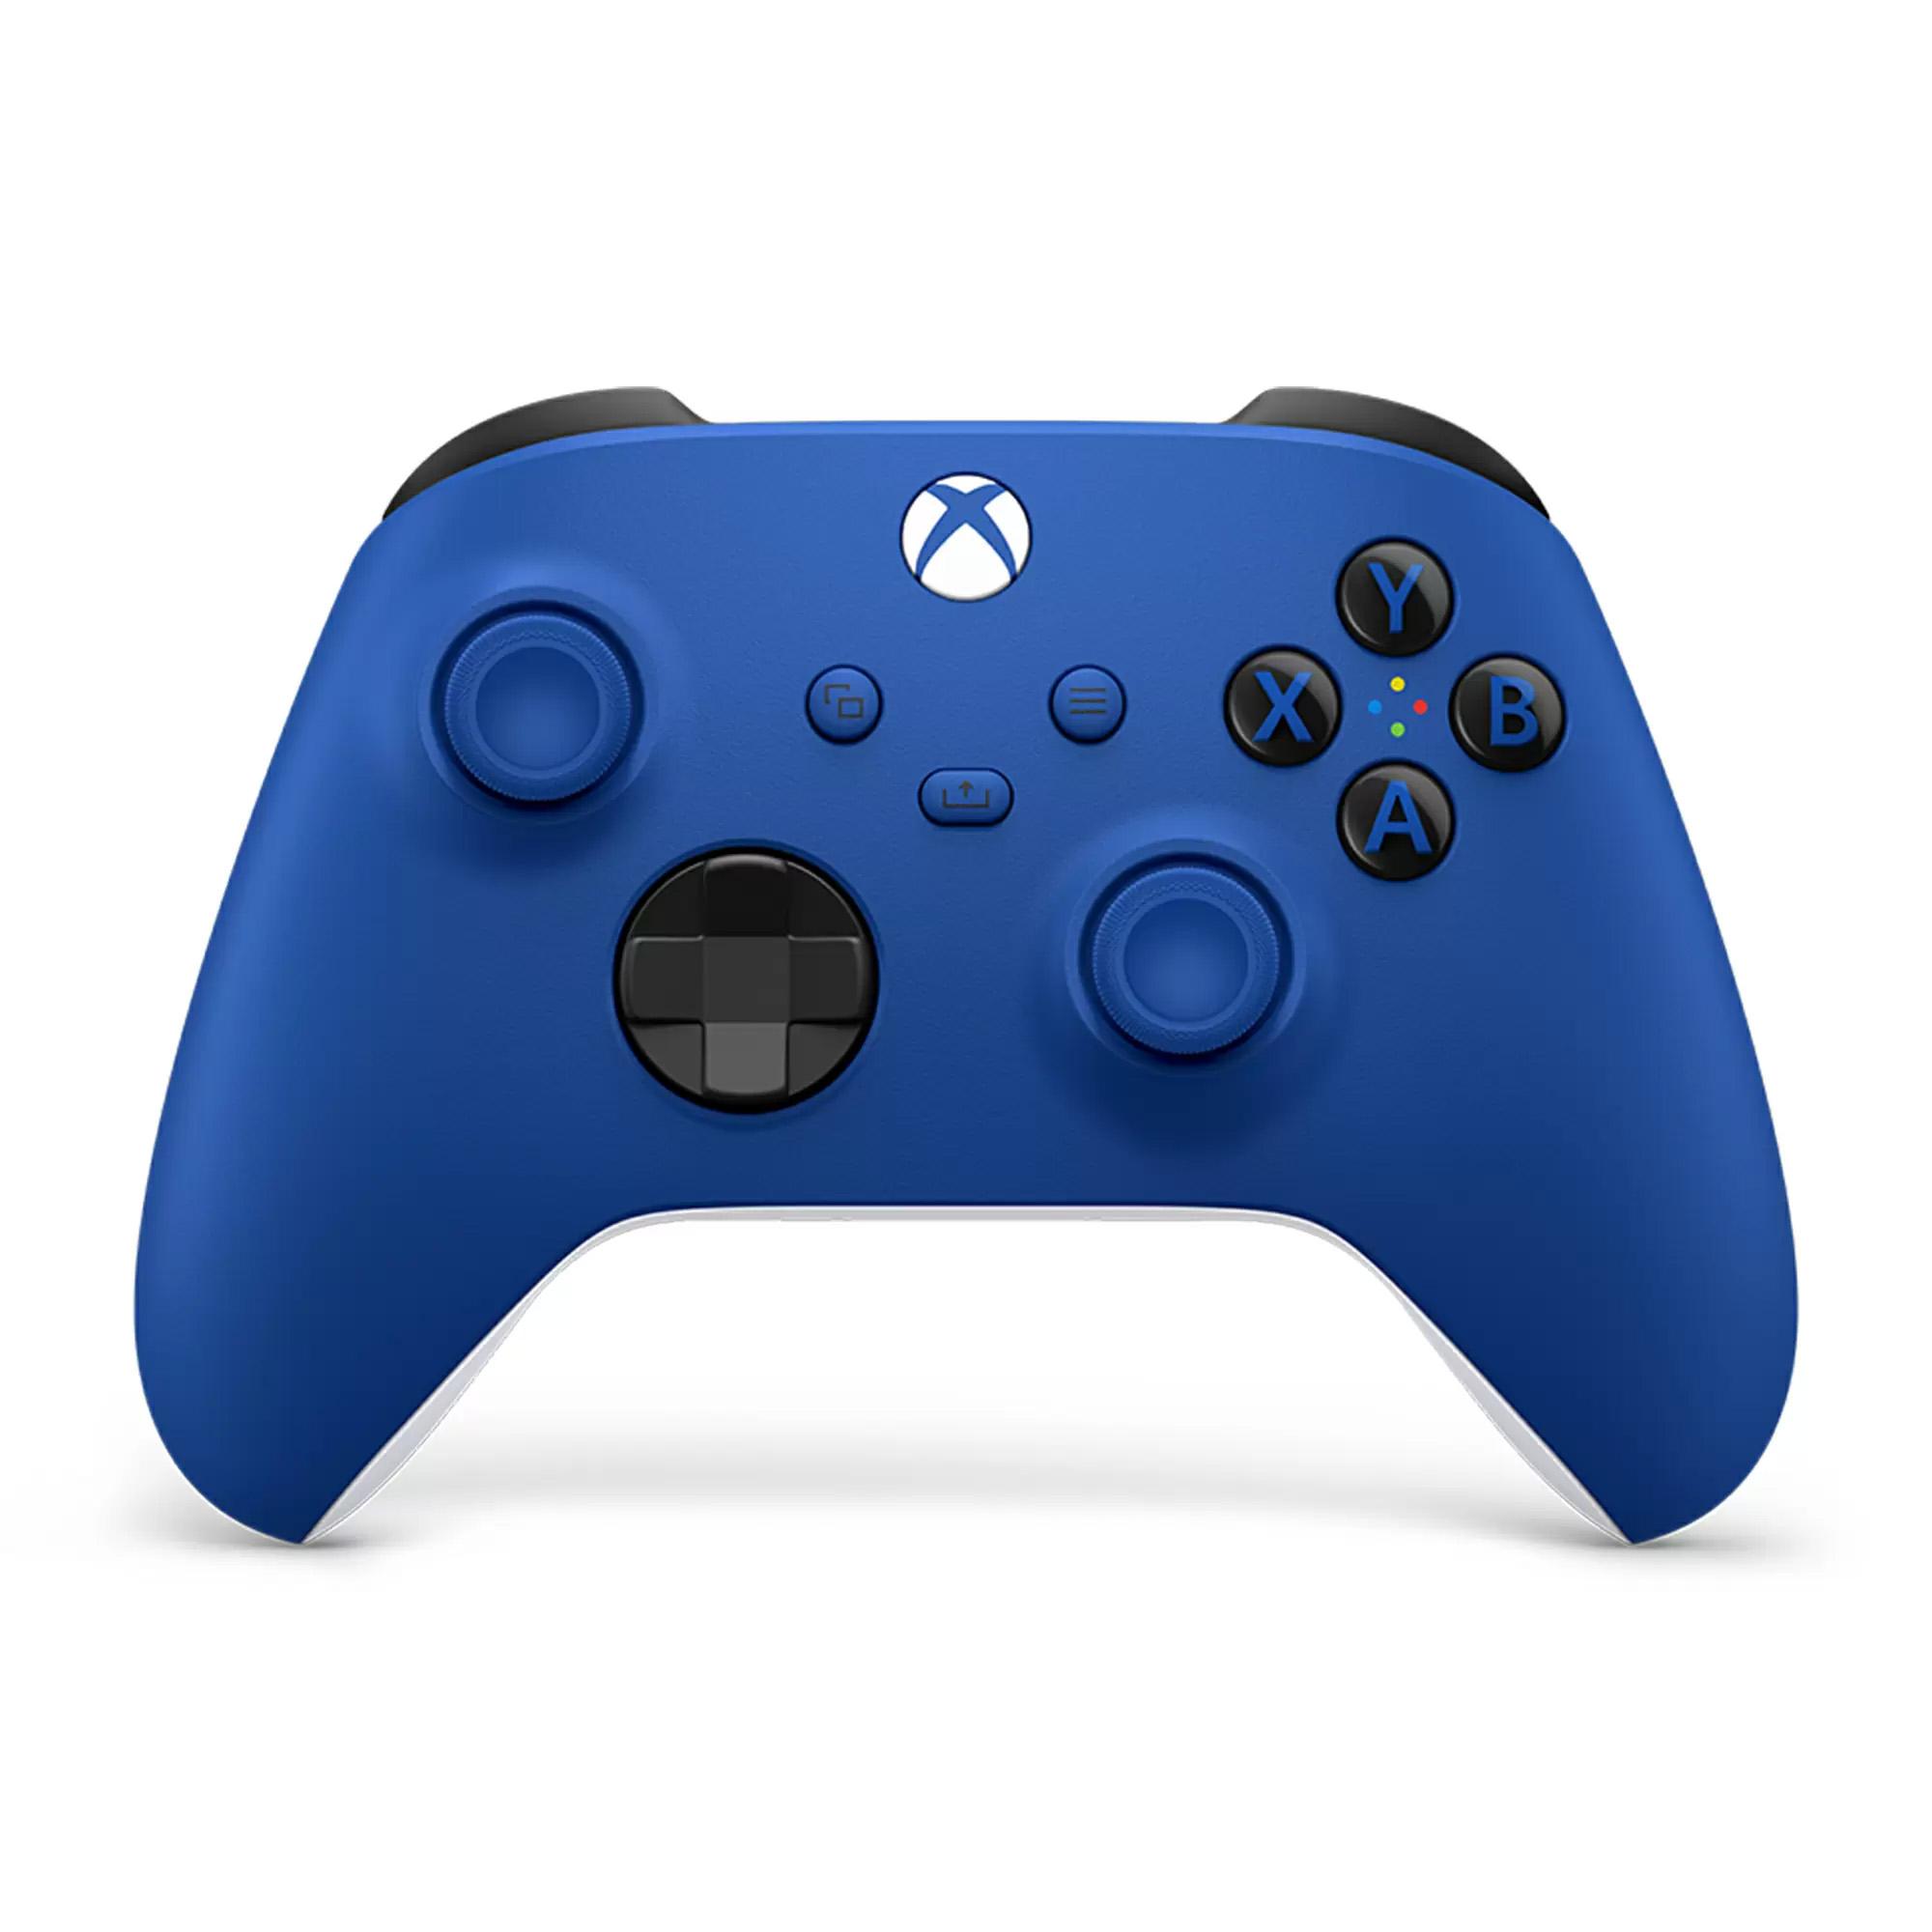 Microsoft Xbox Wireless Controller in Shock Blue for $39.99 Shipped